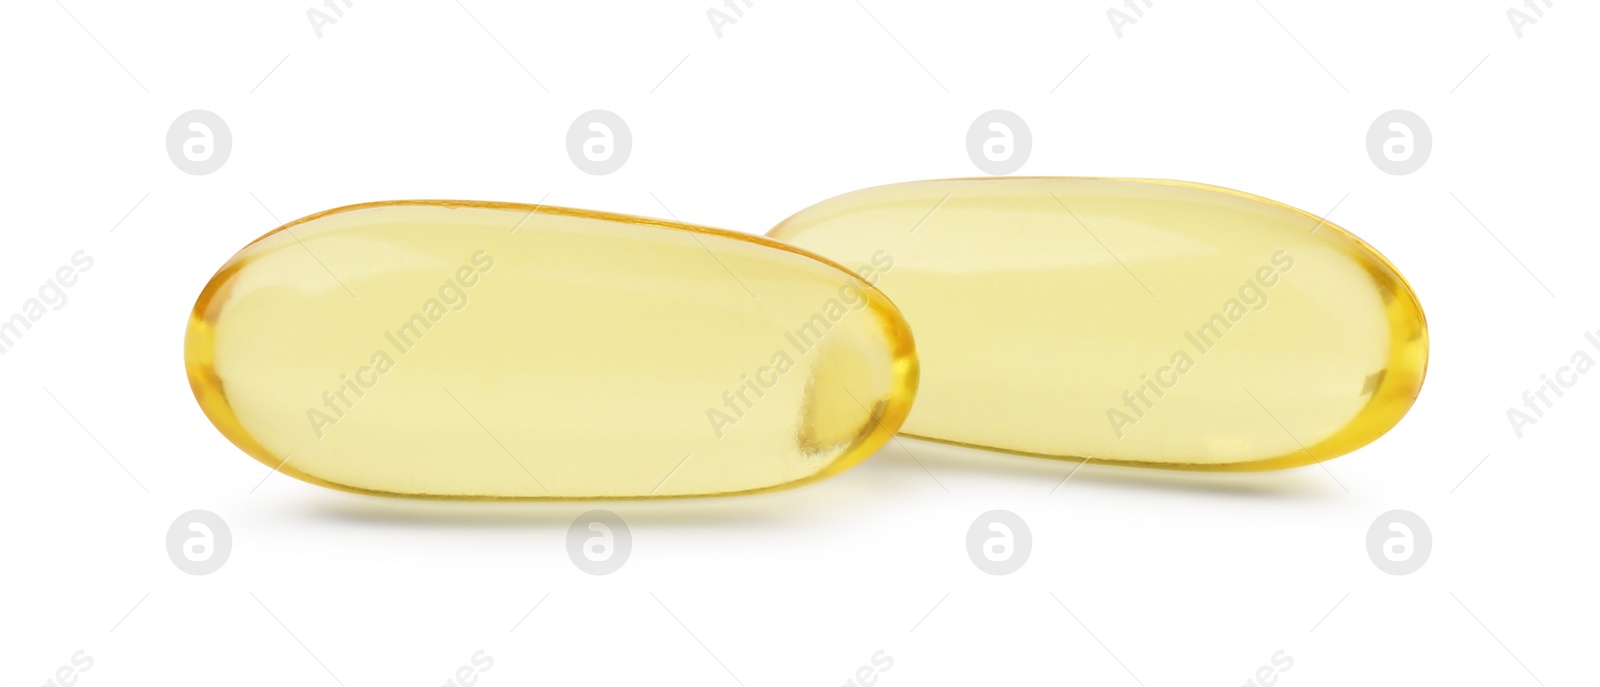 Photo of Two yellow vitamin capsules isolated on white